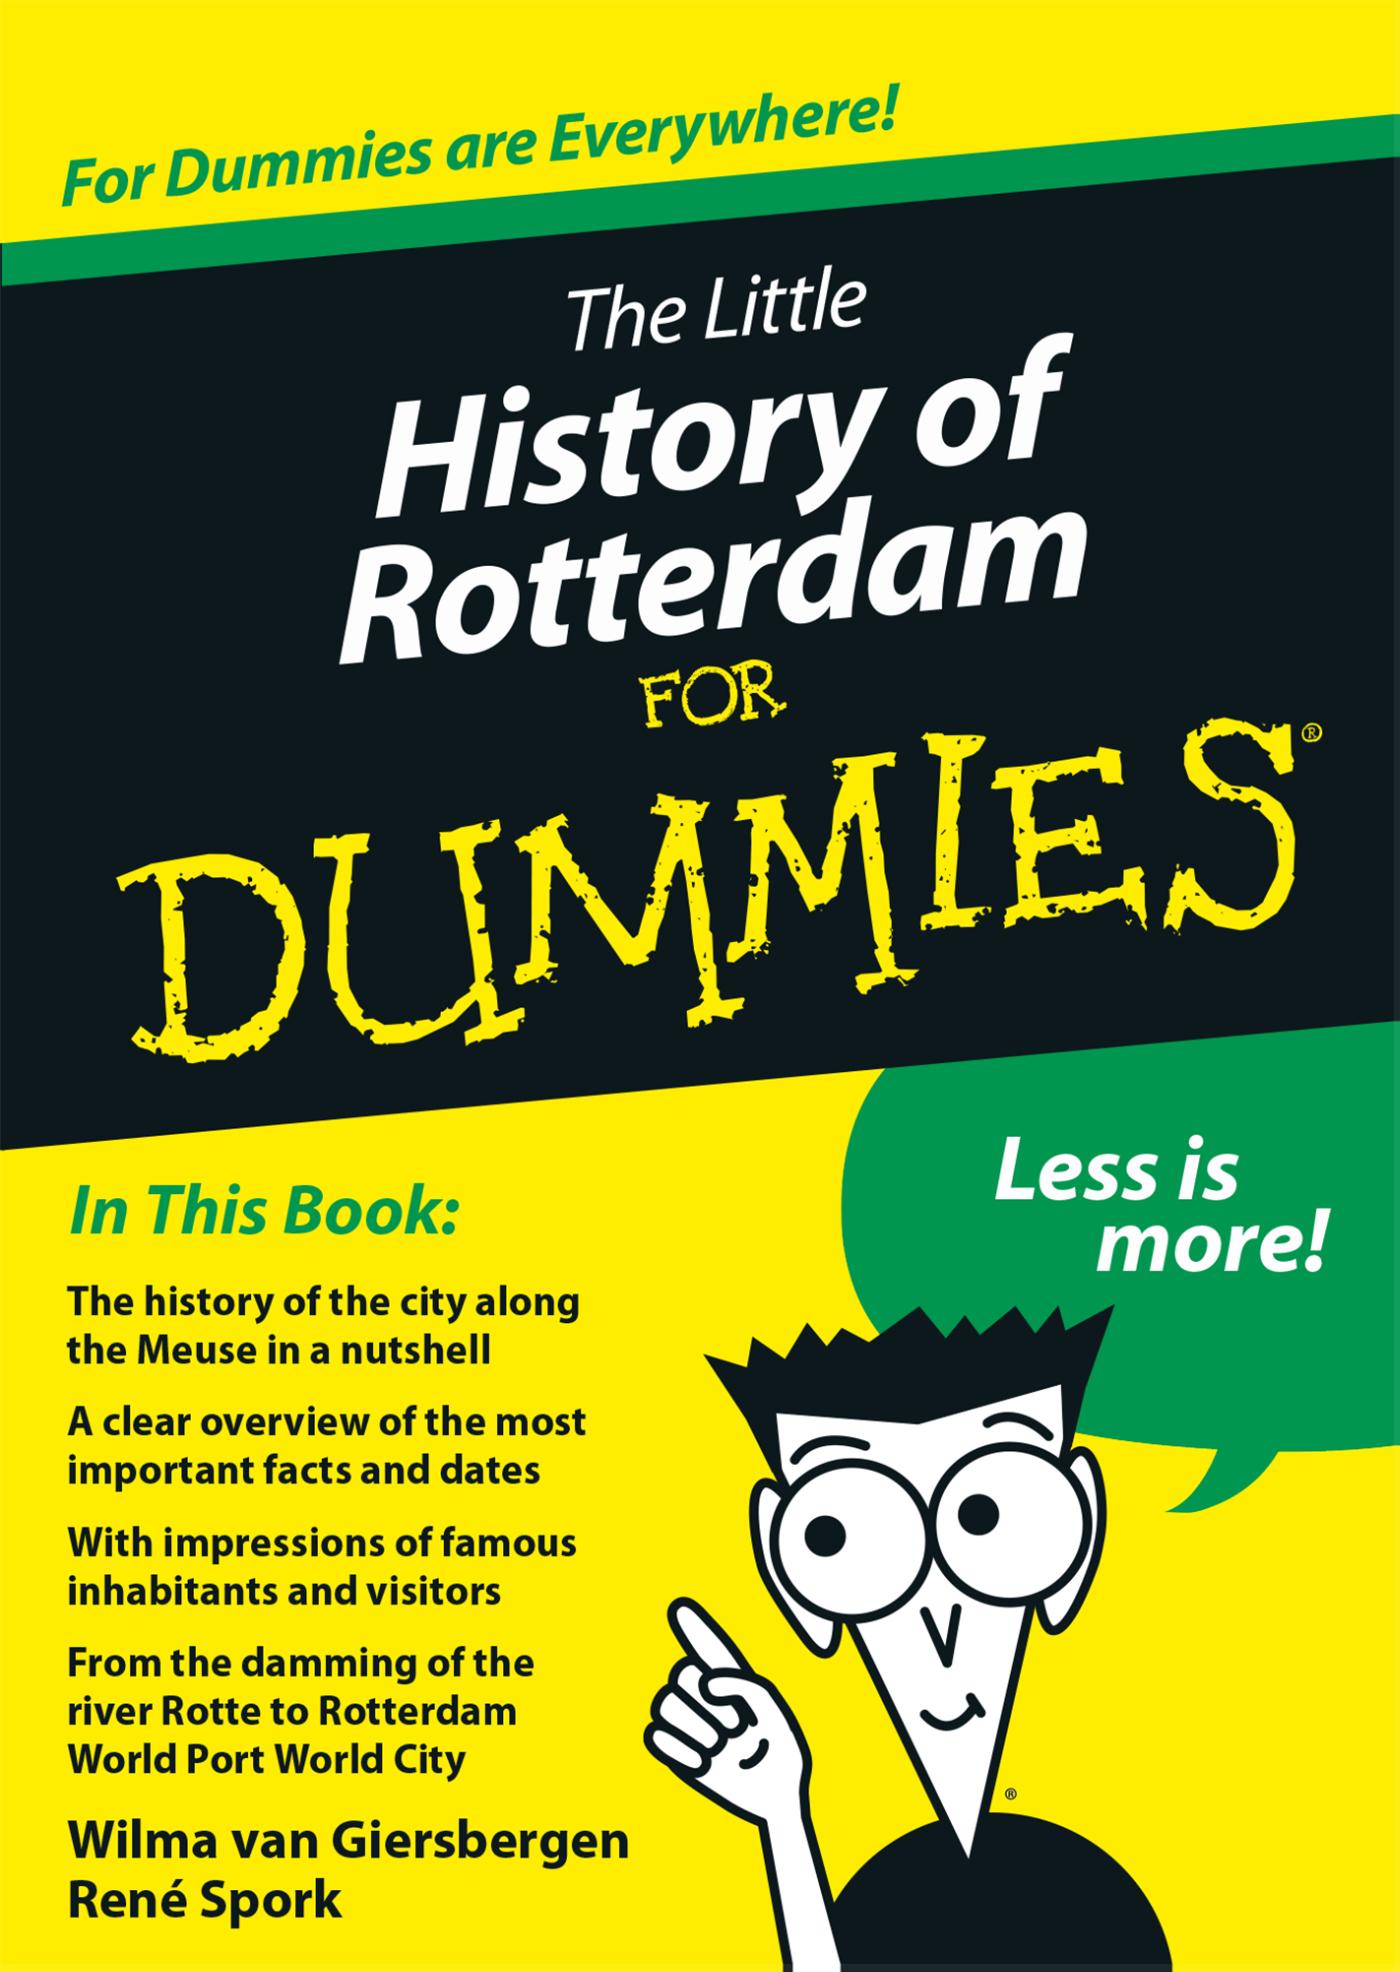 The little history of Rotterdam for Dummies (Ebook)